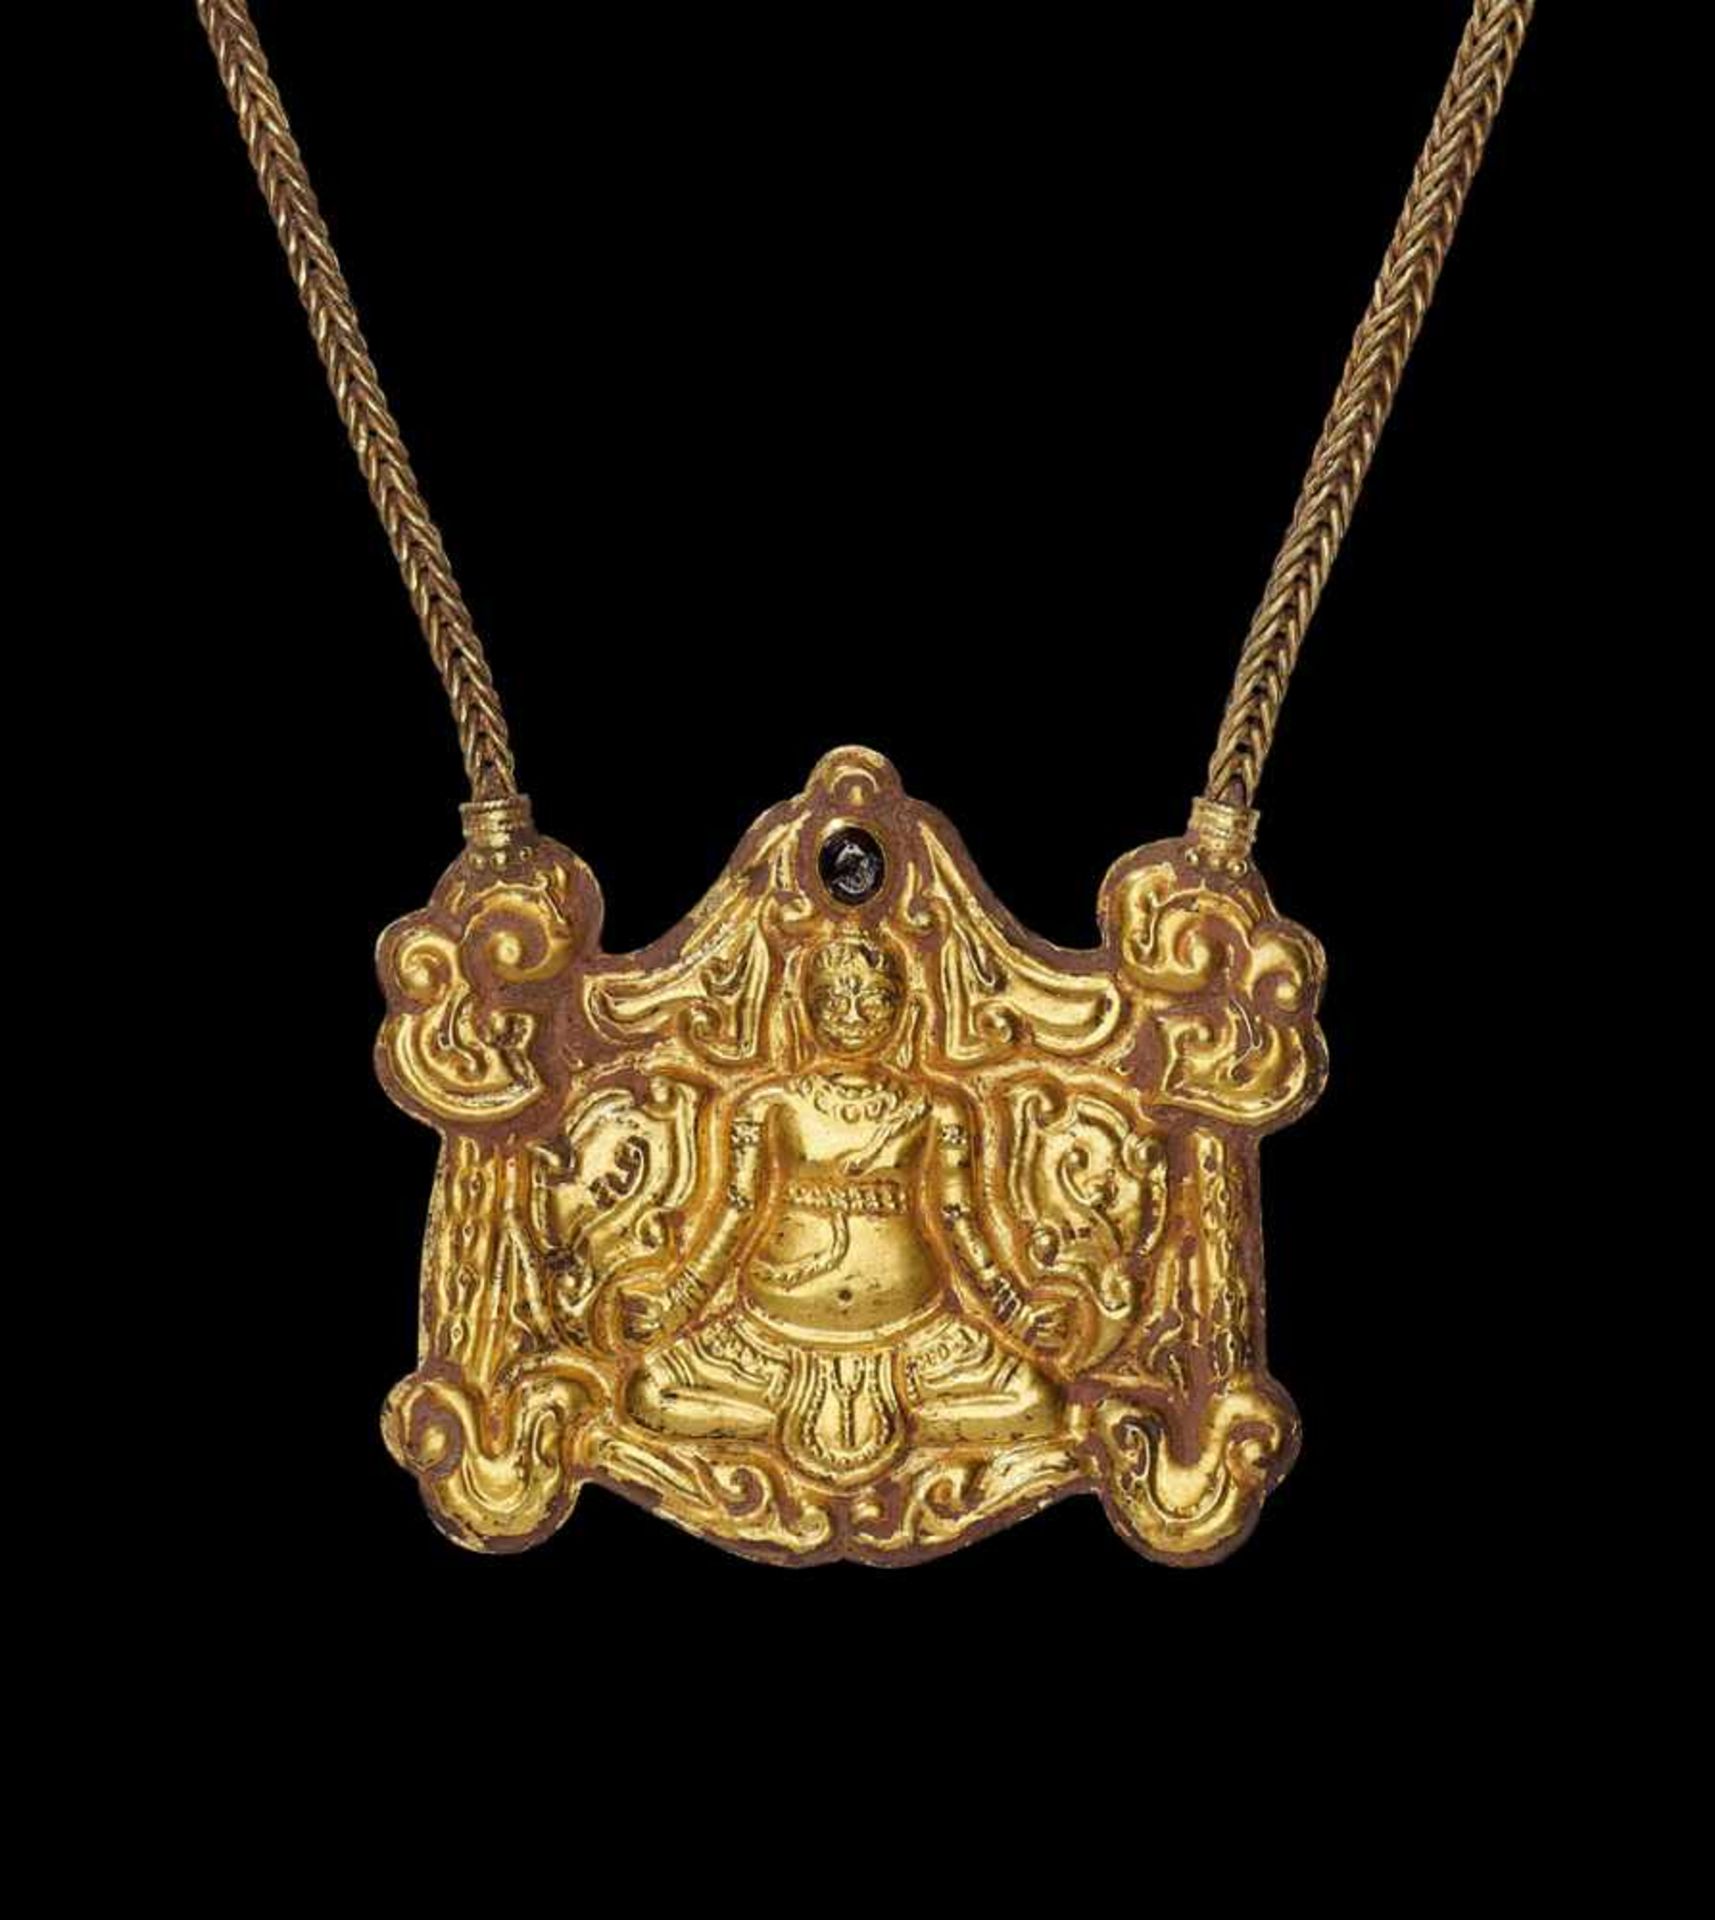 A CHAM REPOUSSÉ GOLD NECKLACE WITH A PECTORAL DEPICTING A SEATED HINDU DEITY Central Cham kingdom, - Image 2 of 5